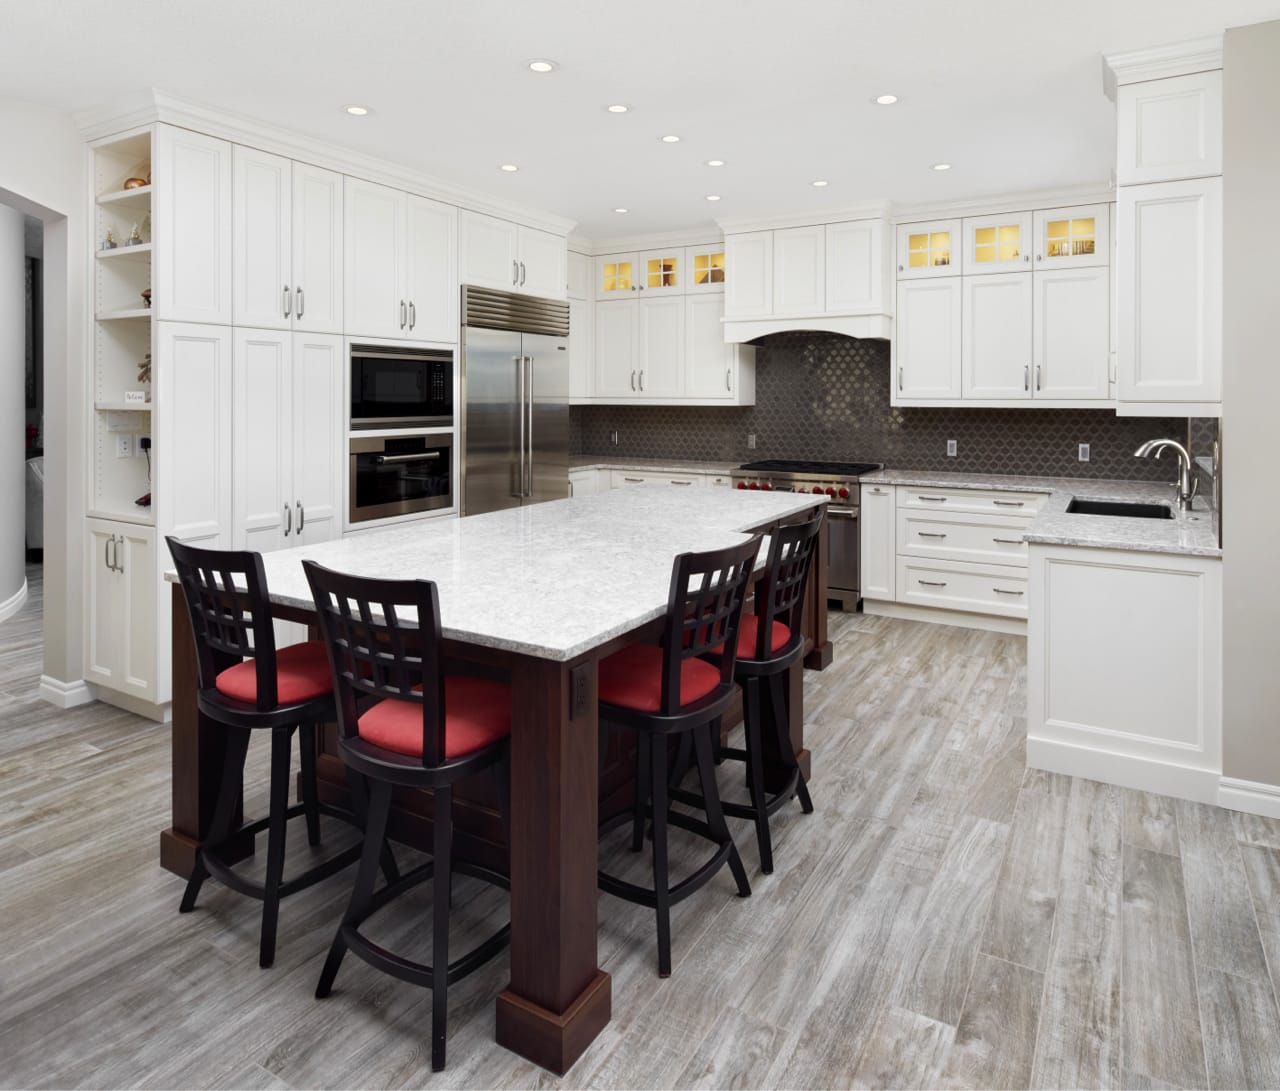 White shaker cabinets and a large kitchen island make this kitchen feel spacious and refreshed.